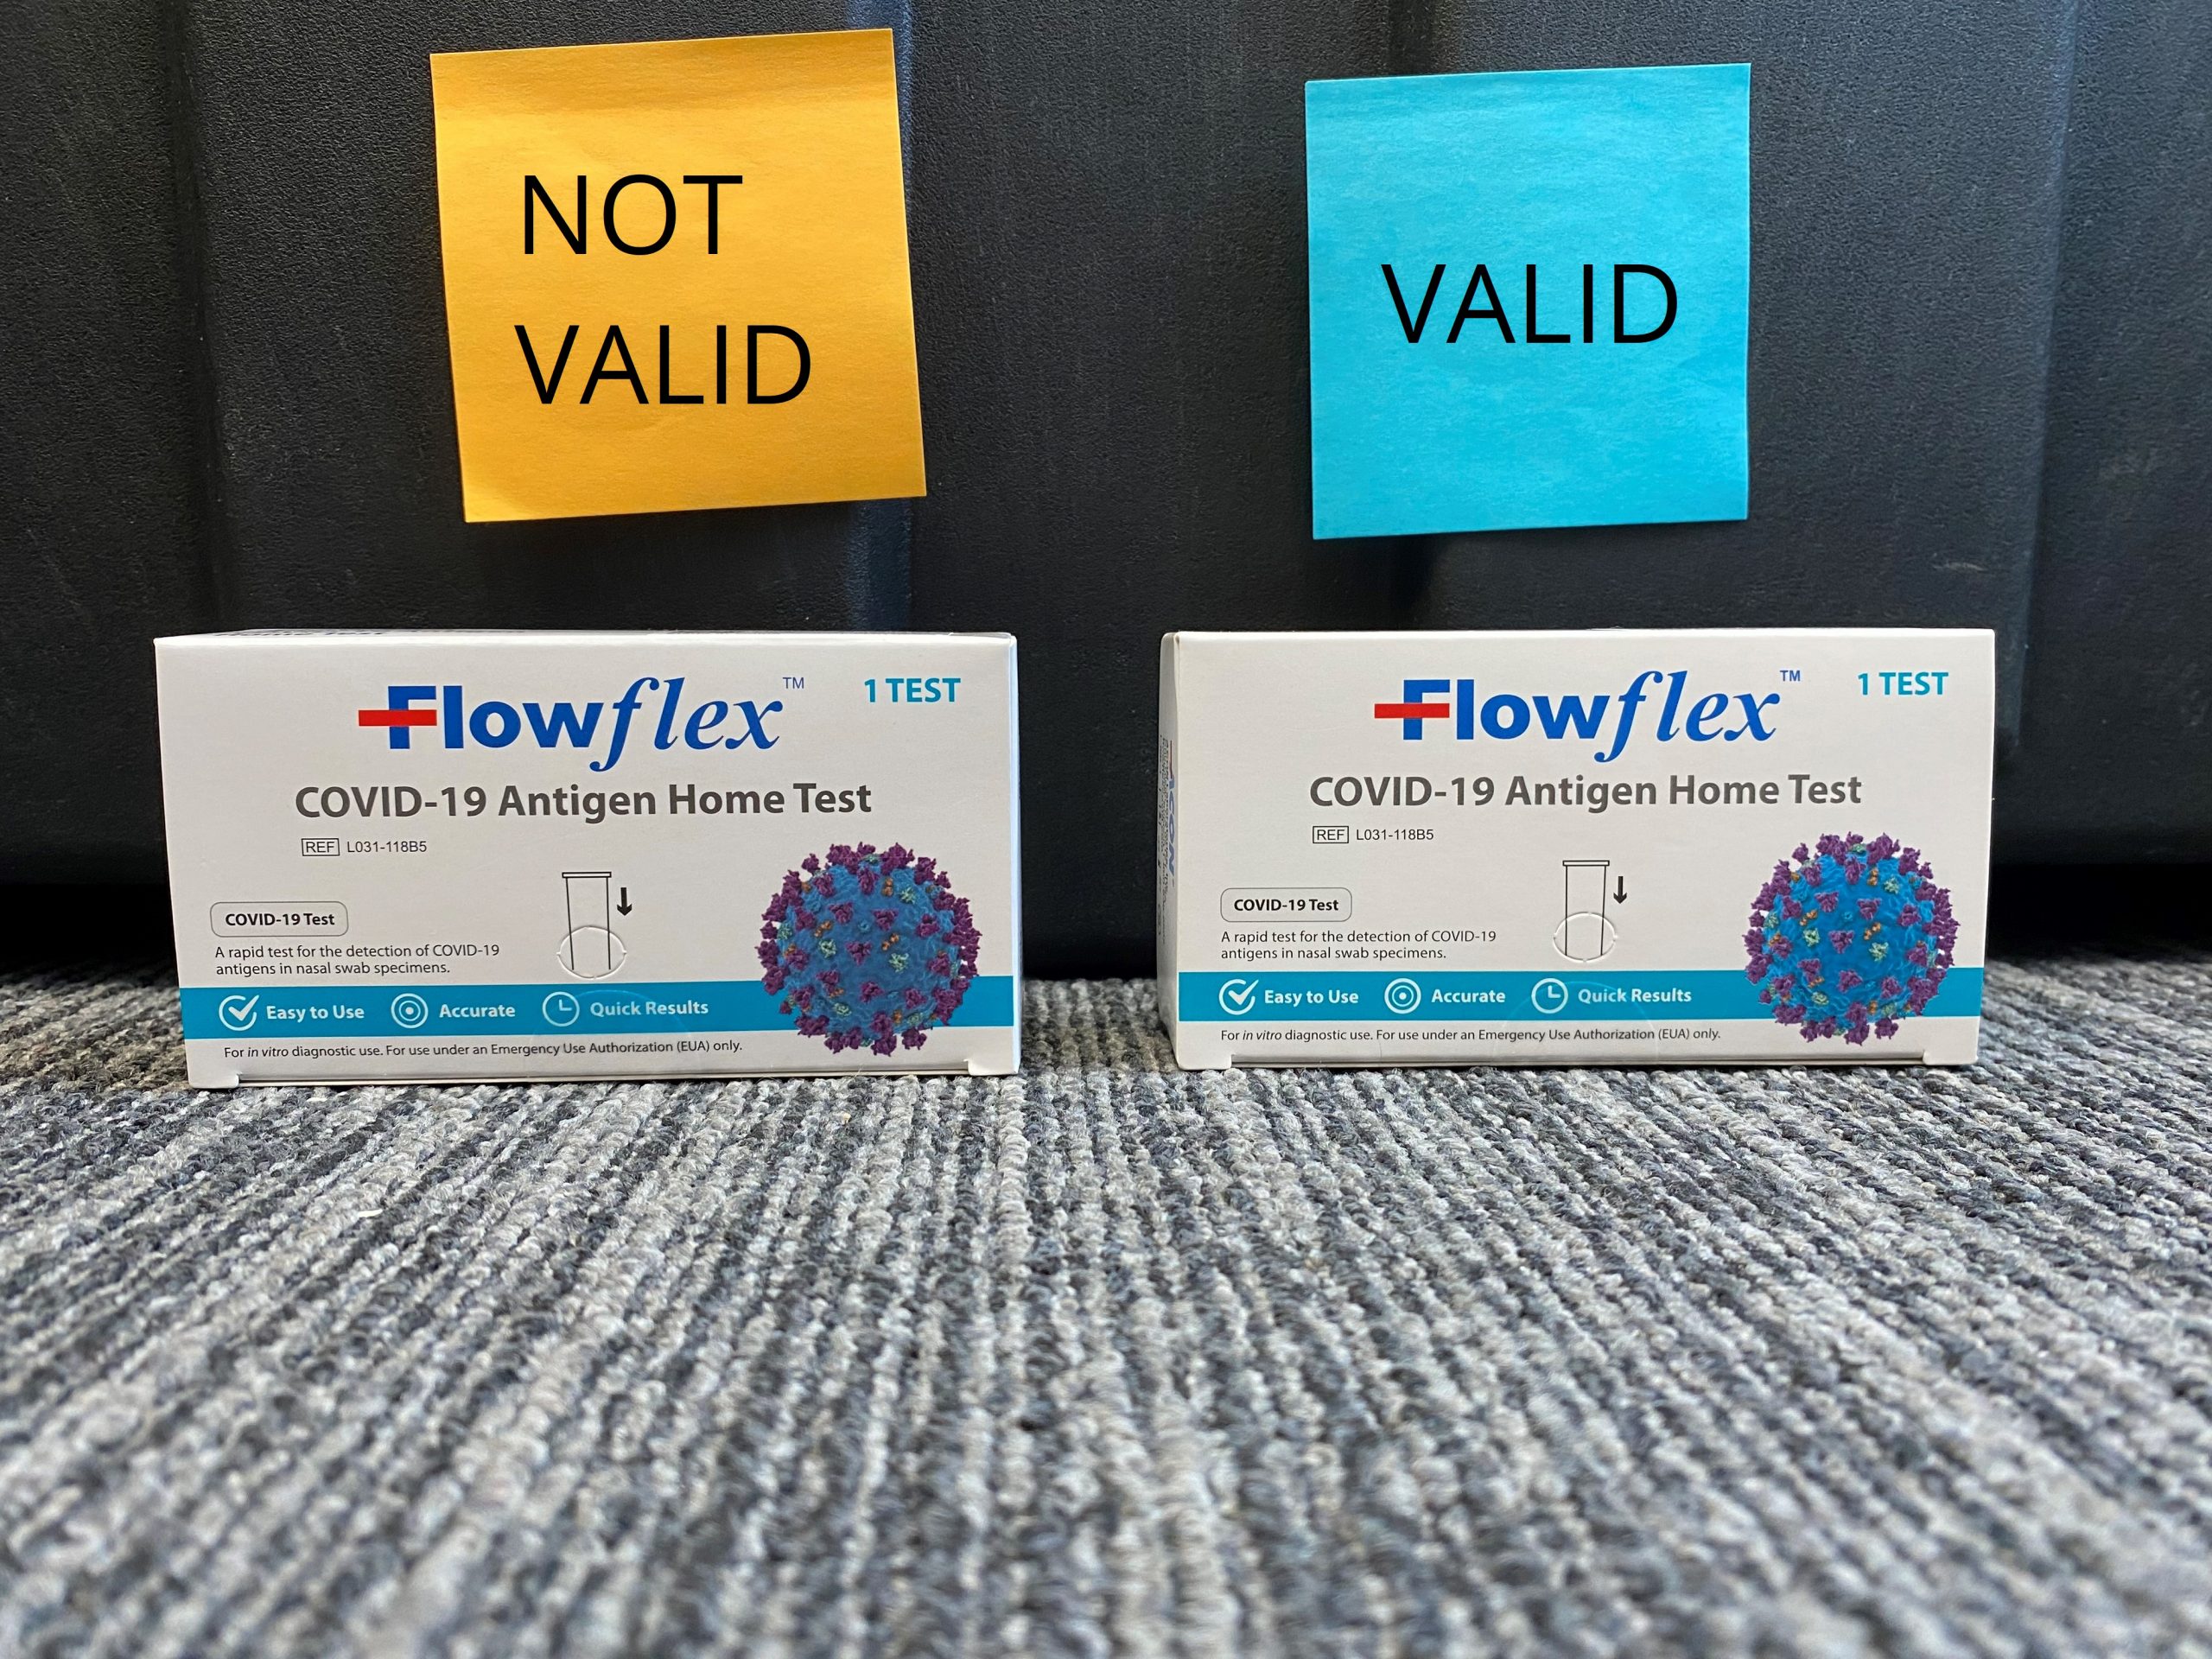 Two COVID-19 testing kits, one labeled as Valid and the other labeled as Invalid